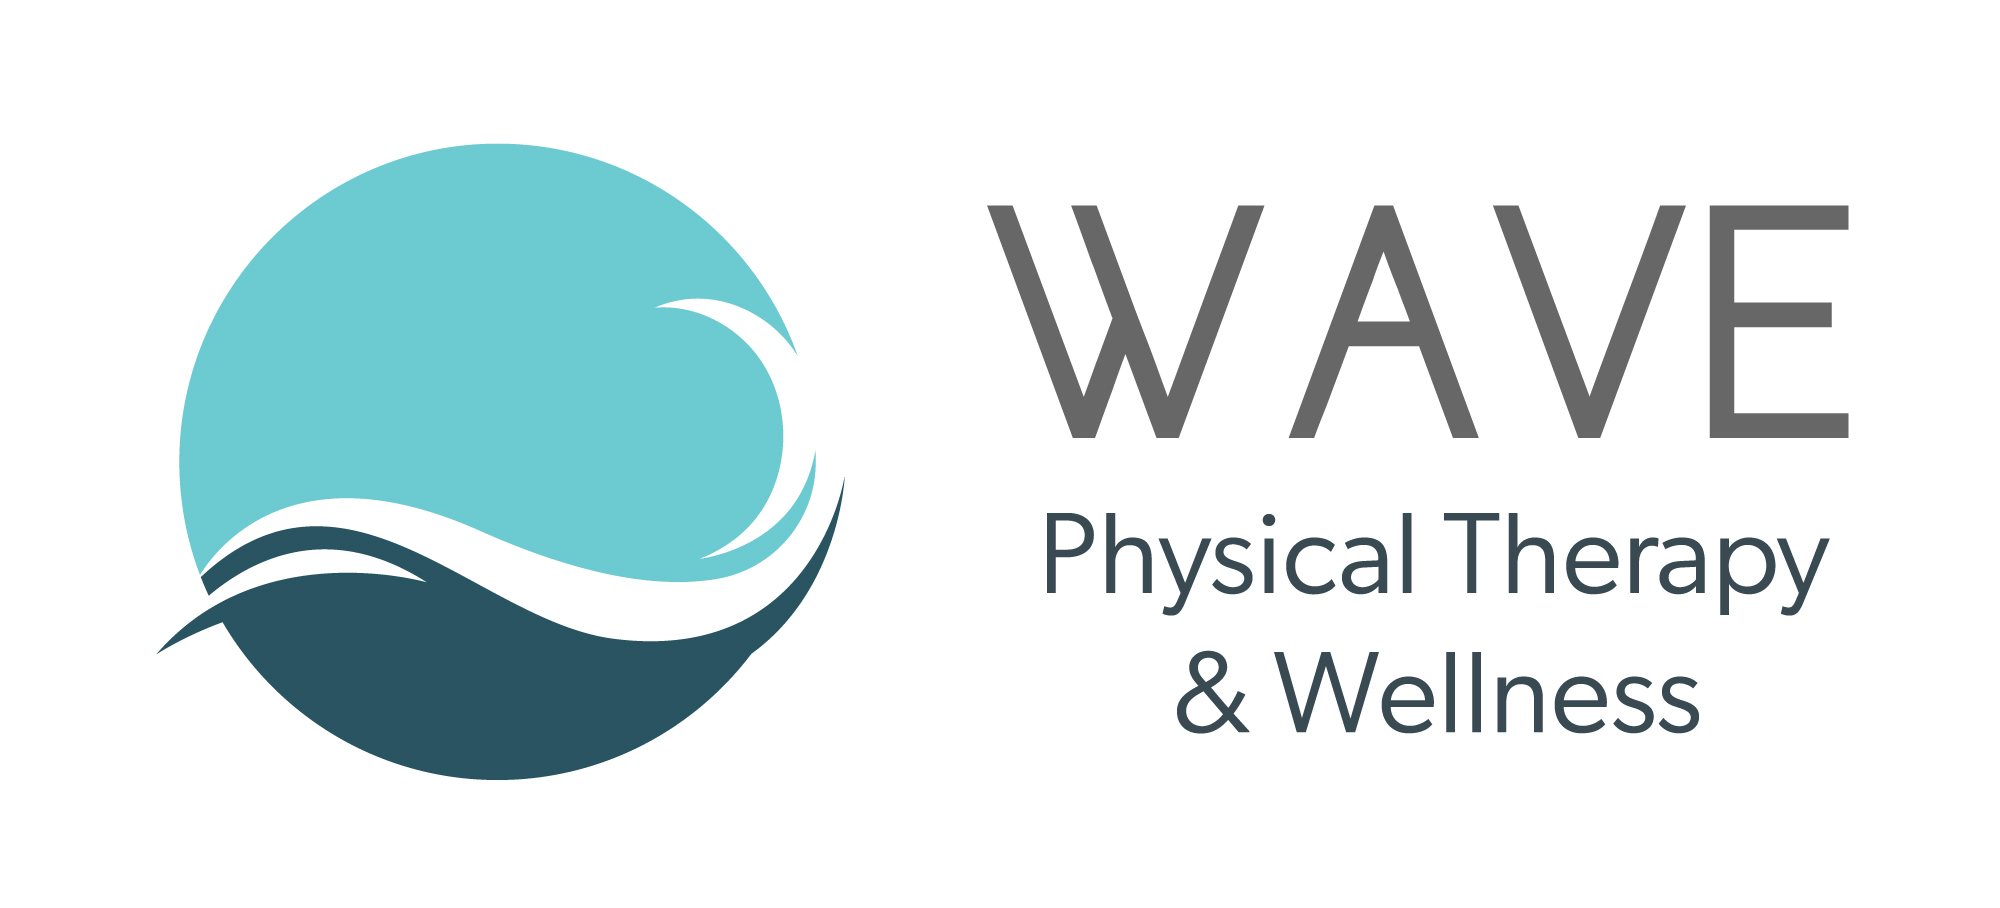 Wave Physical Therapy & Wellness